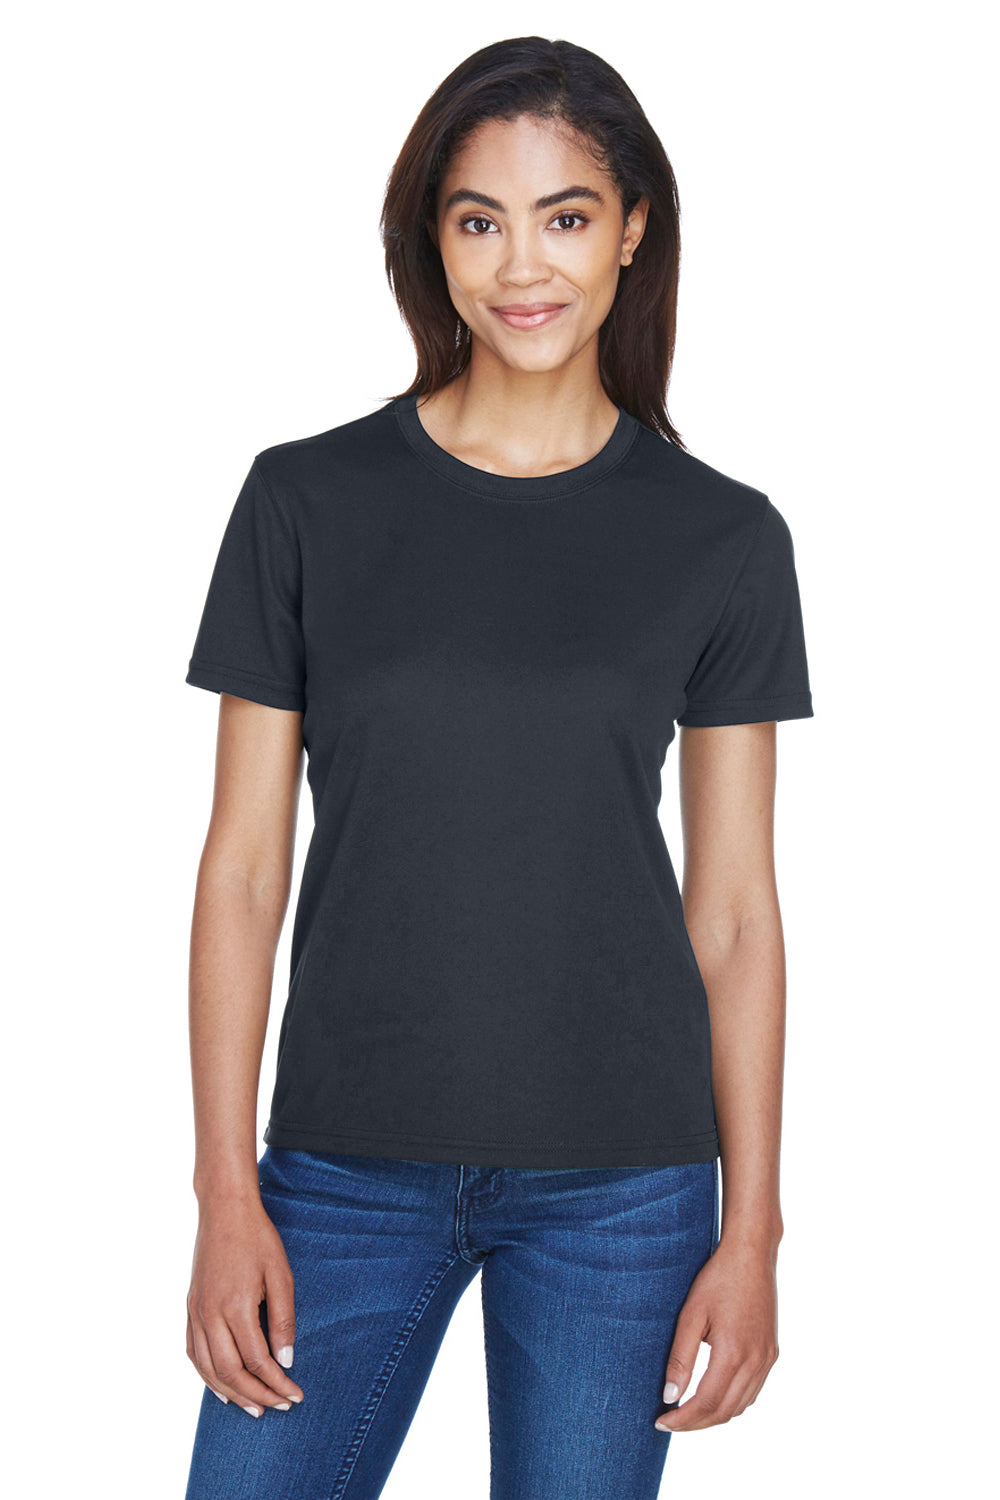 Core 365 78182 Womens Pace Performance Moisture Wicking Short Sleeve Crewneck T-Shirt Carbon Grey Front